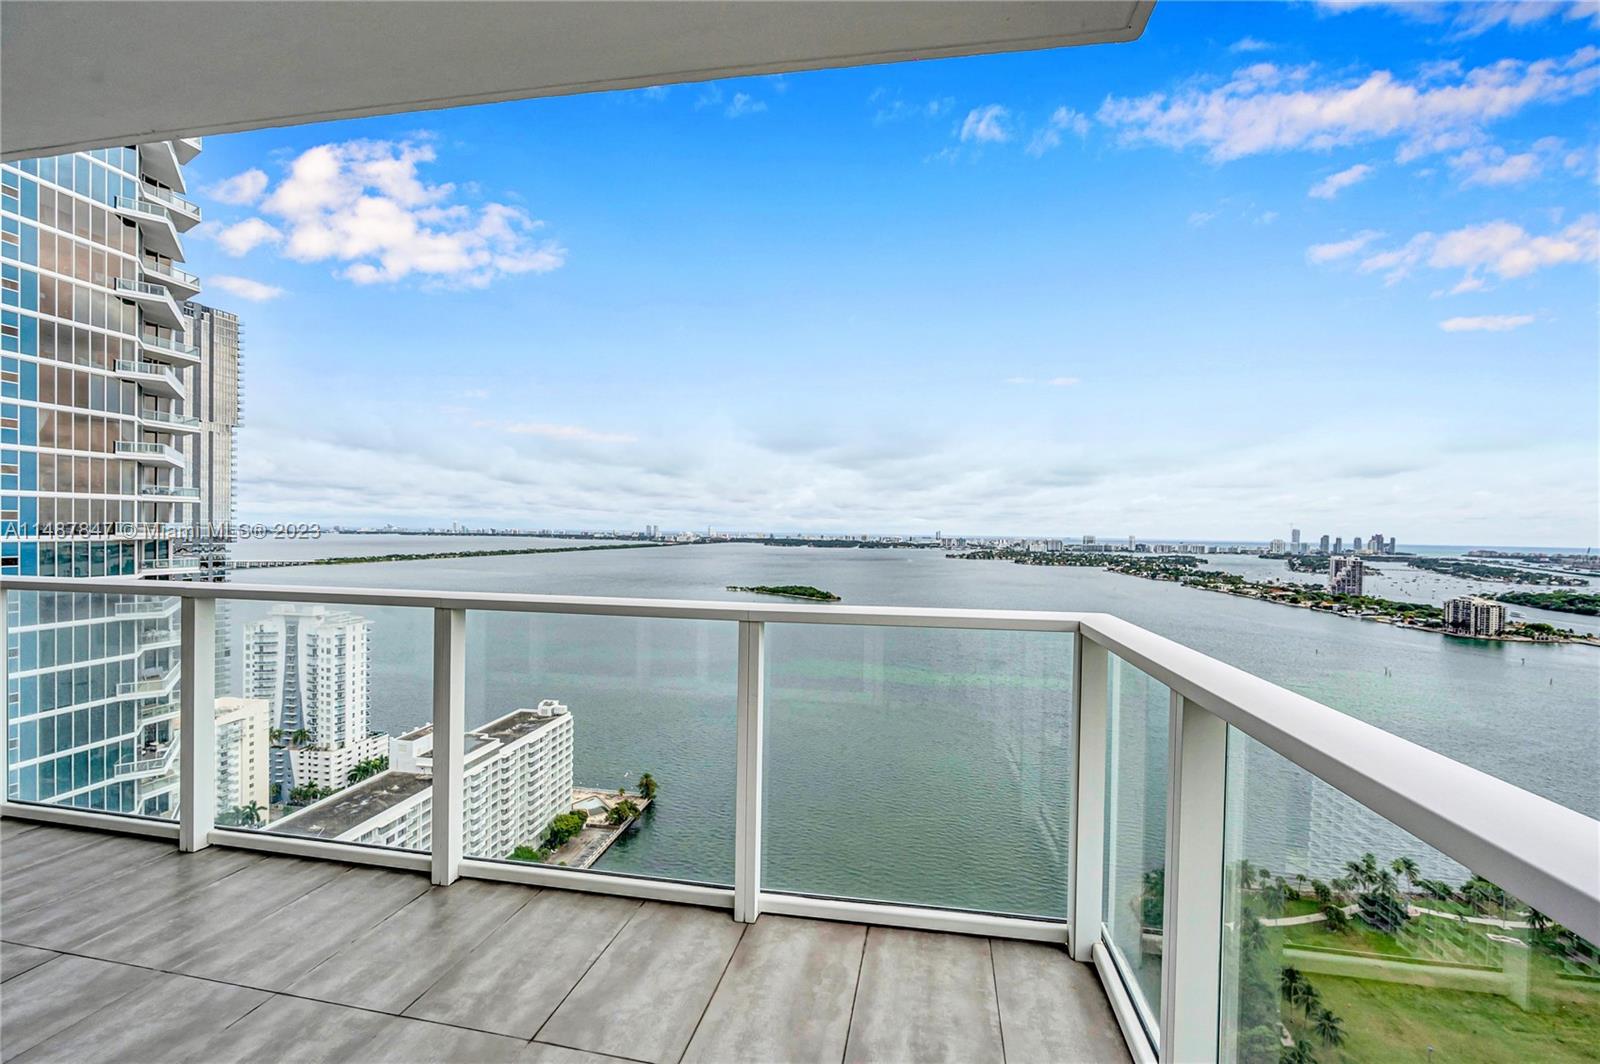 Enjoy the breathtaking views of Biscayne Bay and the Miami Beach skyline from your bayfront terrace. Paramount Bay is Miami Edgewater's premiere residence. Don't miss this rarely available corner and spacious three bedroom, three bath unit. Capture the beach sunrise and Miami's famous sunsets in this flow through layout. A private foyer, floor to ceiling glass walls, wood floors, designer kitchen and sleek bathrooms make this condo feel like a luxurious home in the sky. The amenities at Paramount are extensive, including swimming pools, a 6000sf  state of the art spa, and gym, kids game & party room, concierge, valet parking and more!